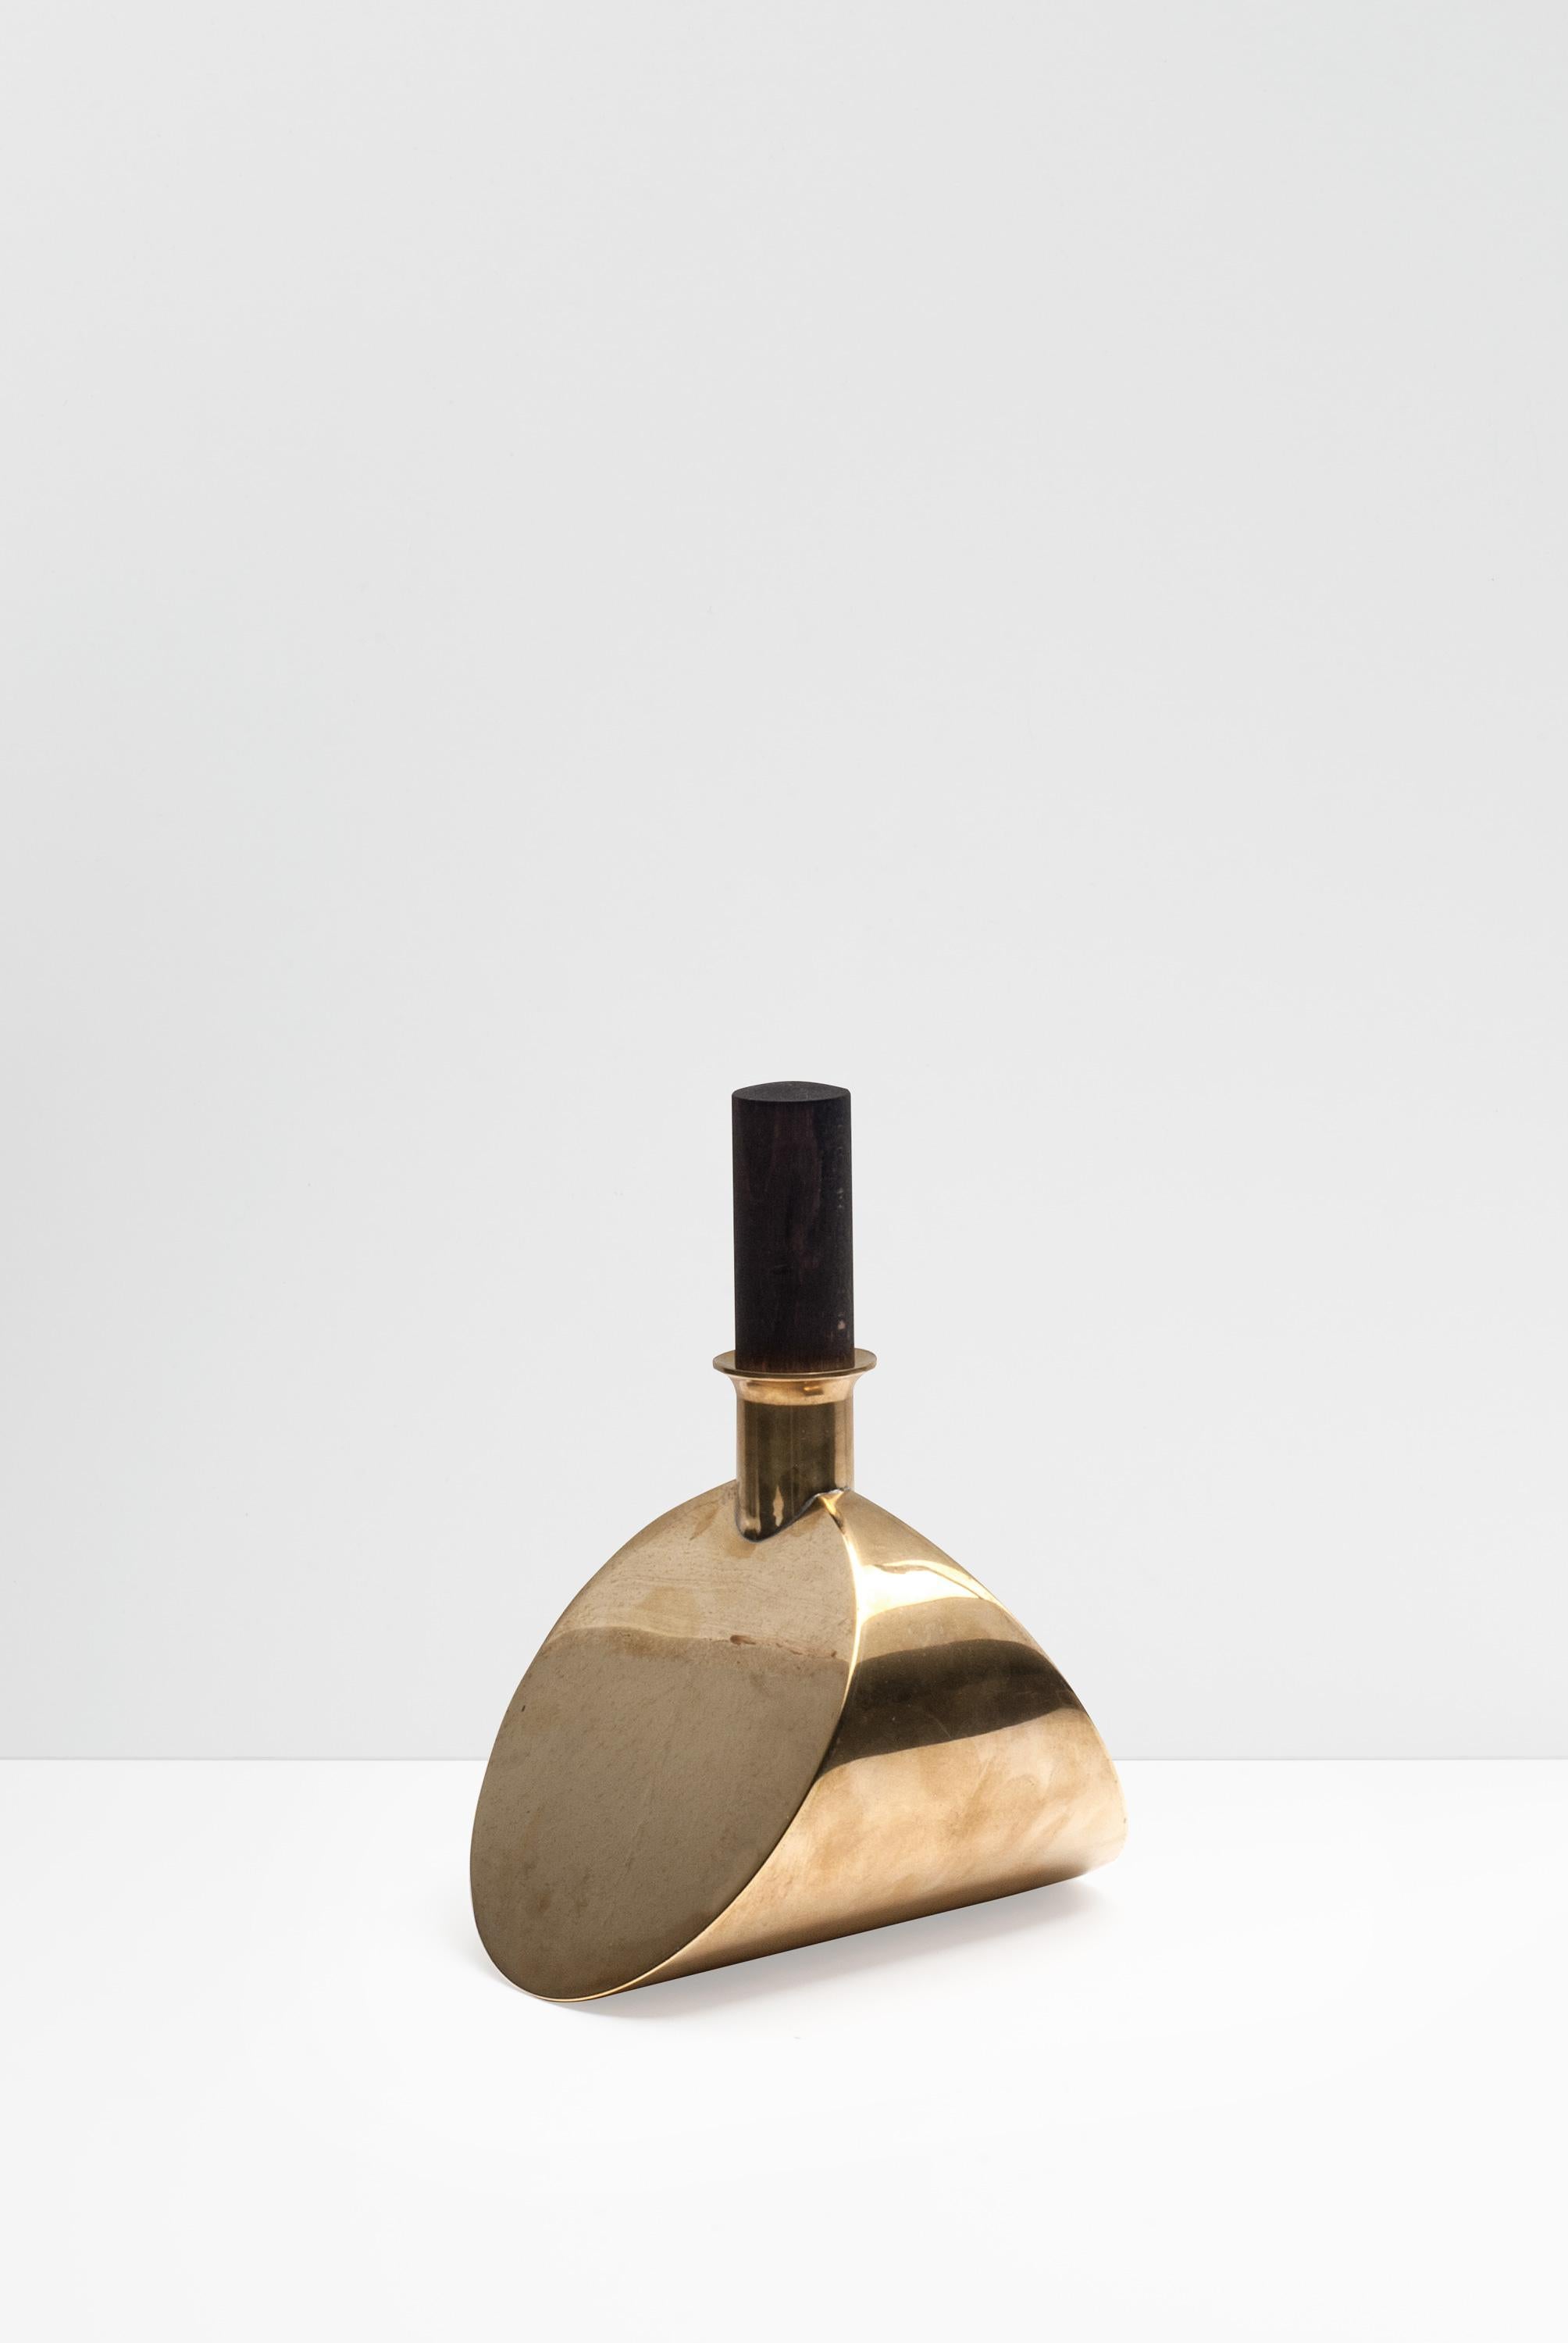 Swedish 1970s Brass Decanter with Wooden Stopper by Pierre Forsell for Skultuna